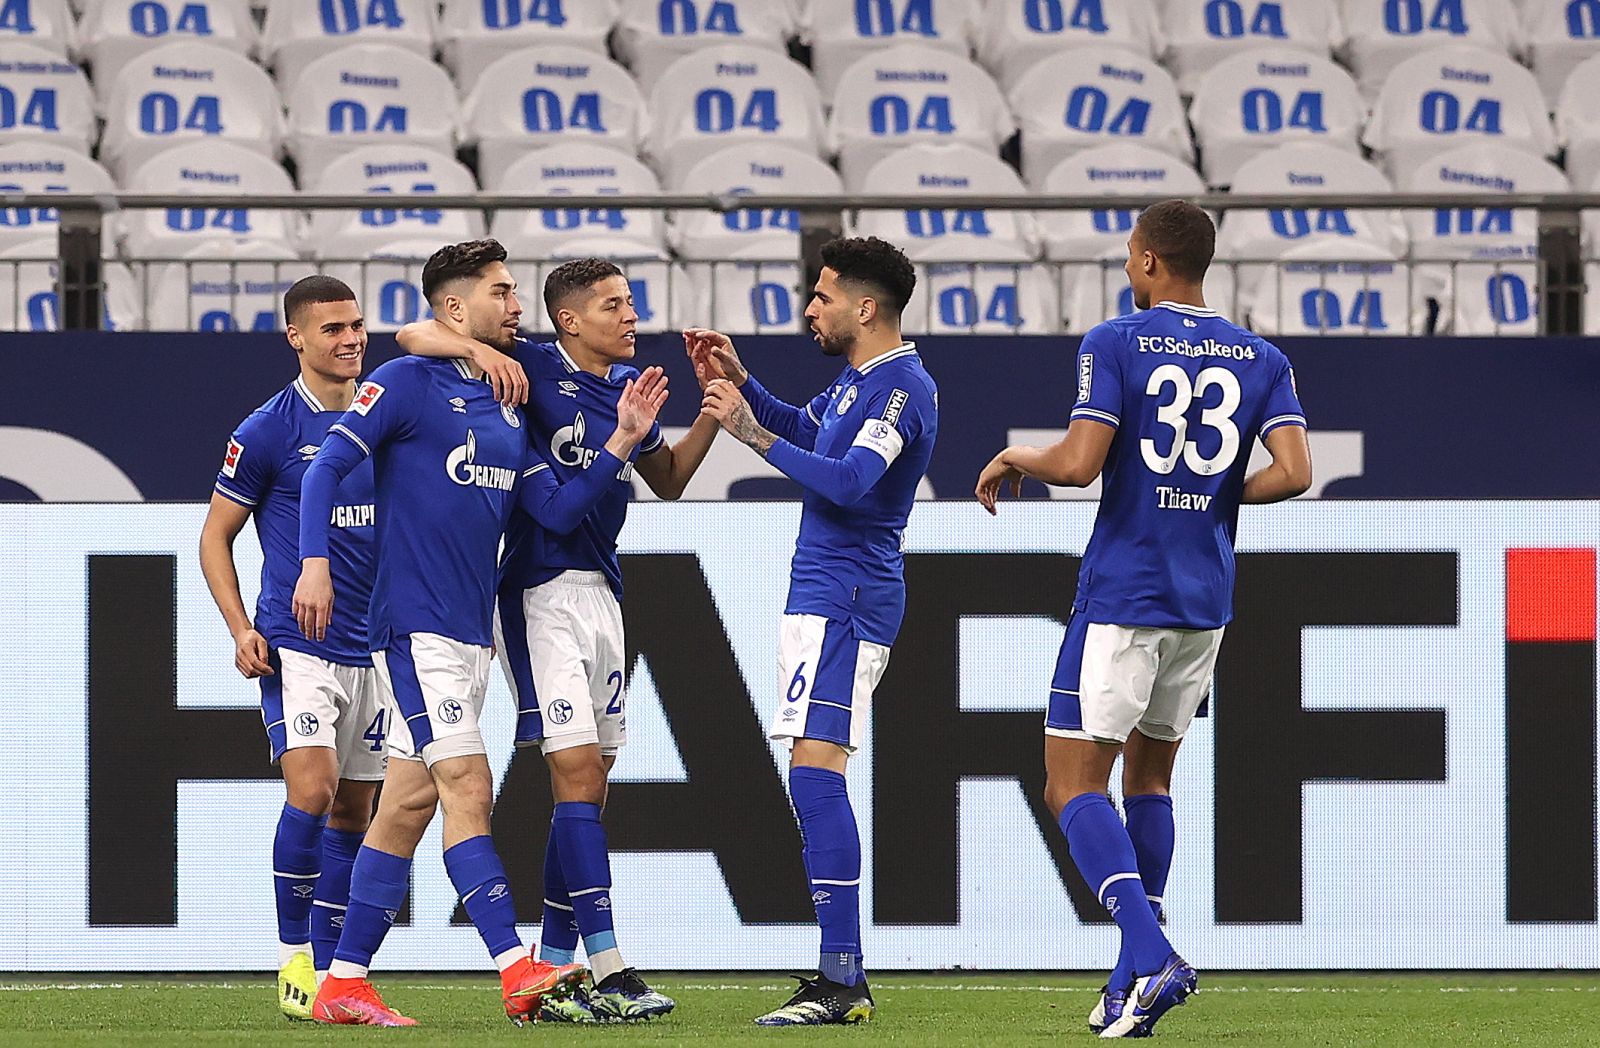 epa09128753 Suat Serdar (2-L) of FC Schalke 04 celebrates with team-mates after scoring their side's first goal during the German Bundesliga soccer match between FC Schalke 04 and FC Augsburg at Veltins-Arena in Gelsenkirchen, Germany, 11 April 2021.  EPA/Lars Baron / POOL CONDITIONS - ATTENTION:  The DFL regulations prohibit any use of photographs as image sequences and/or quasi-video.